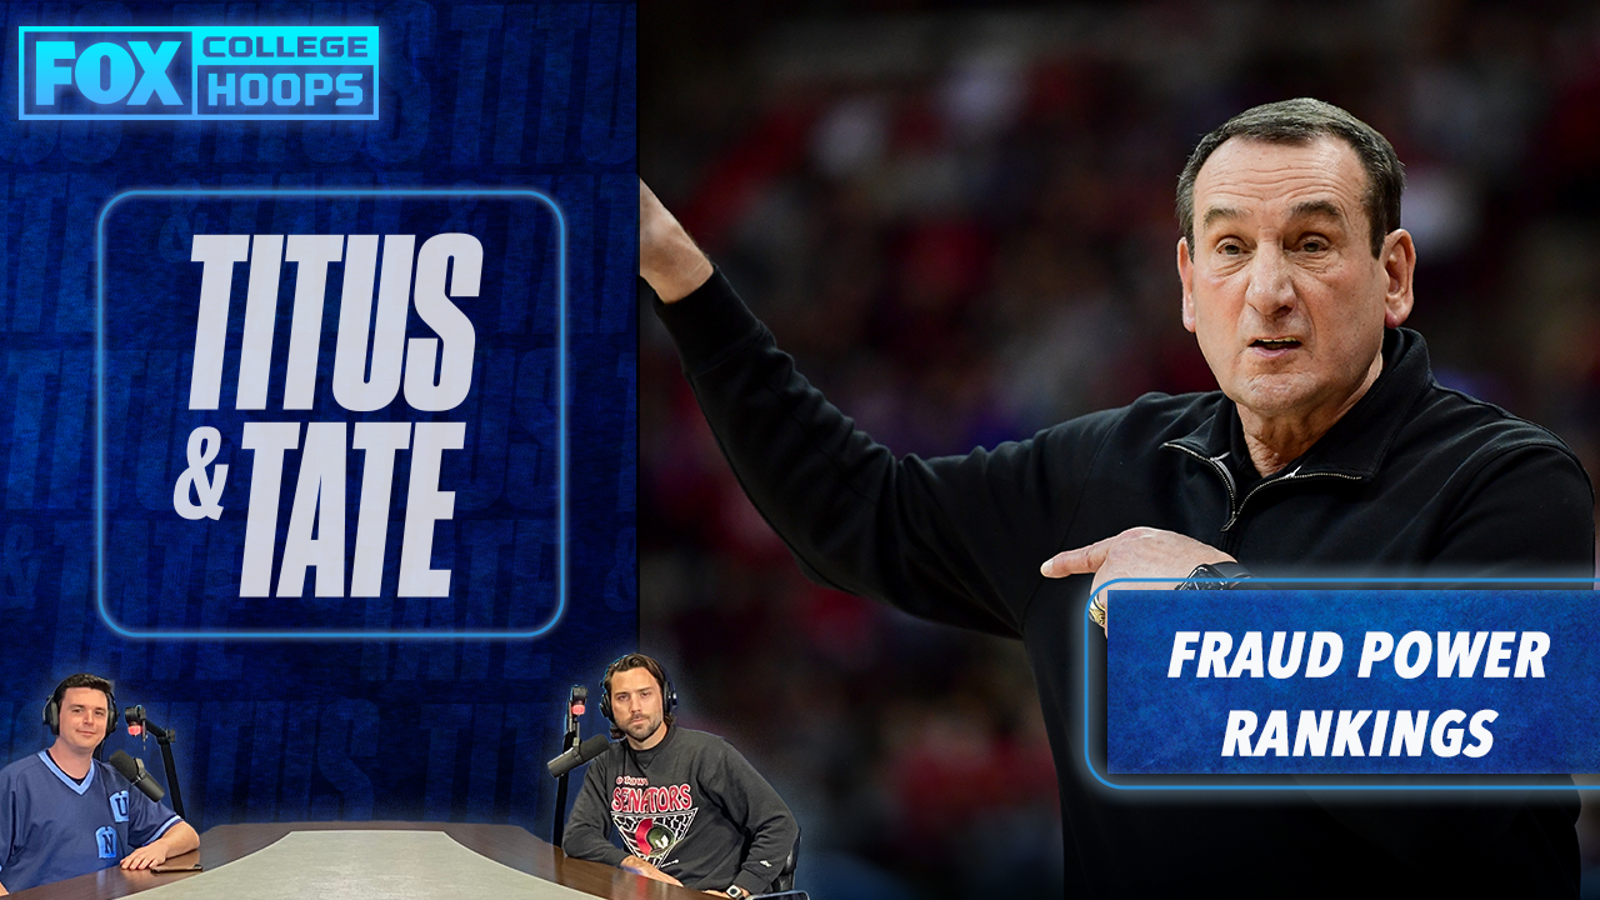 Mark Titus and Tate Frazier discuss Coach K and the rest of this week's fraud power rankings | Titus & Tate